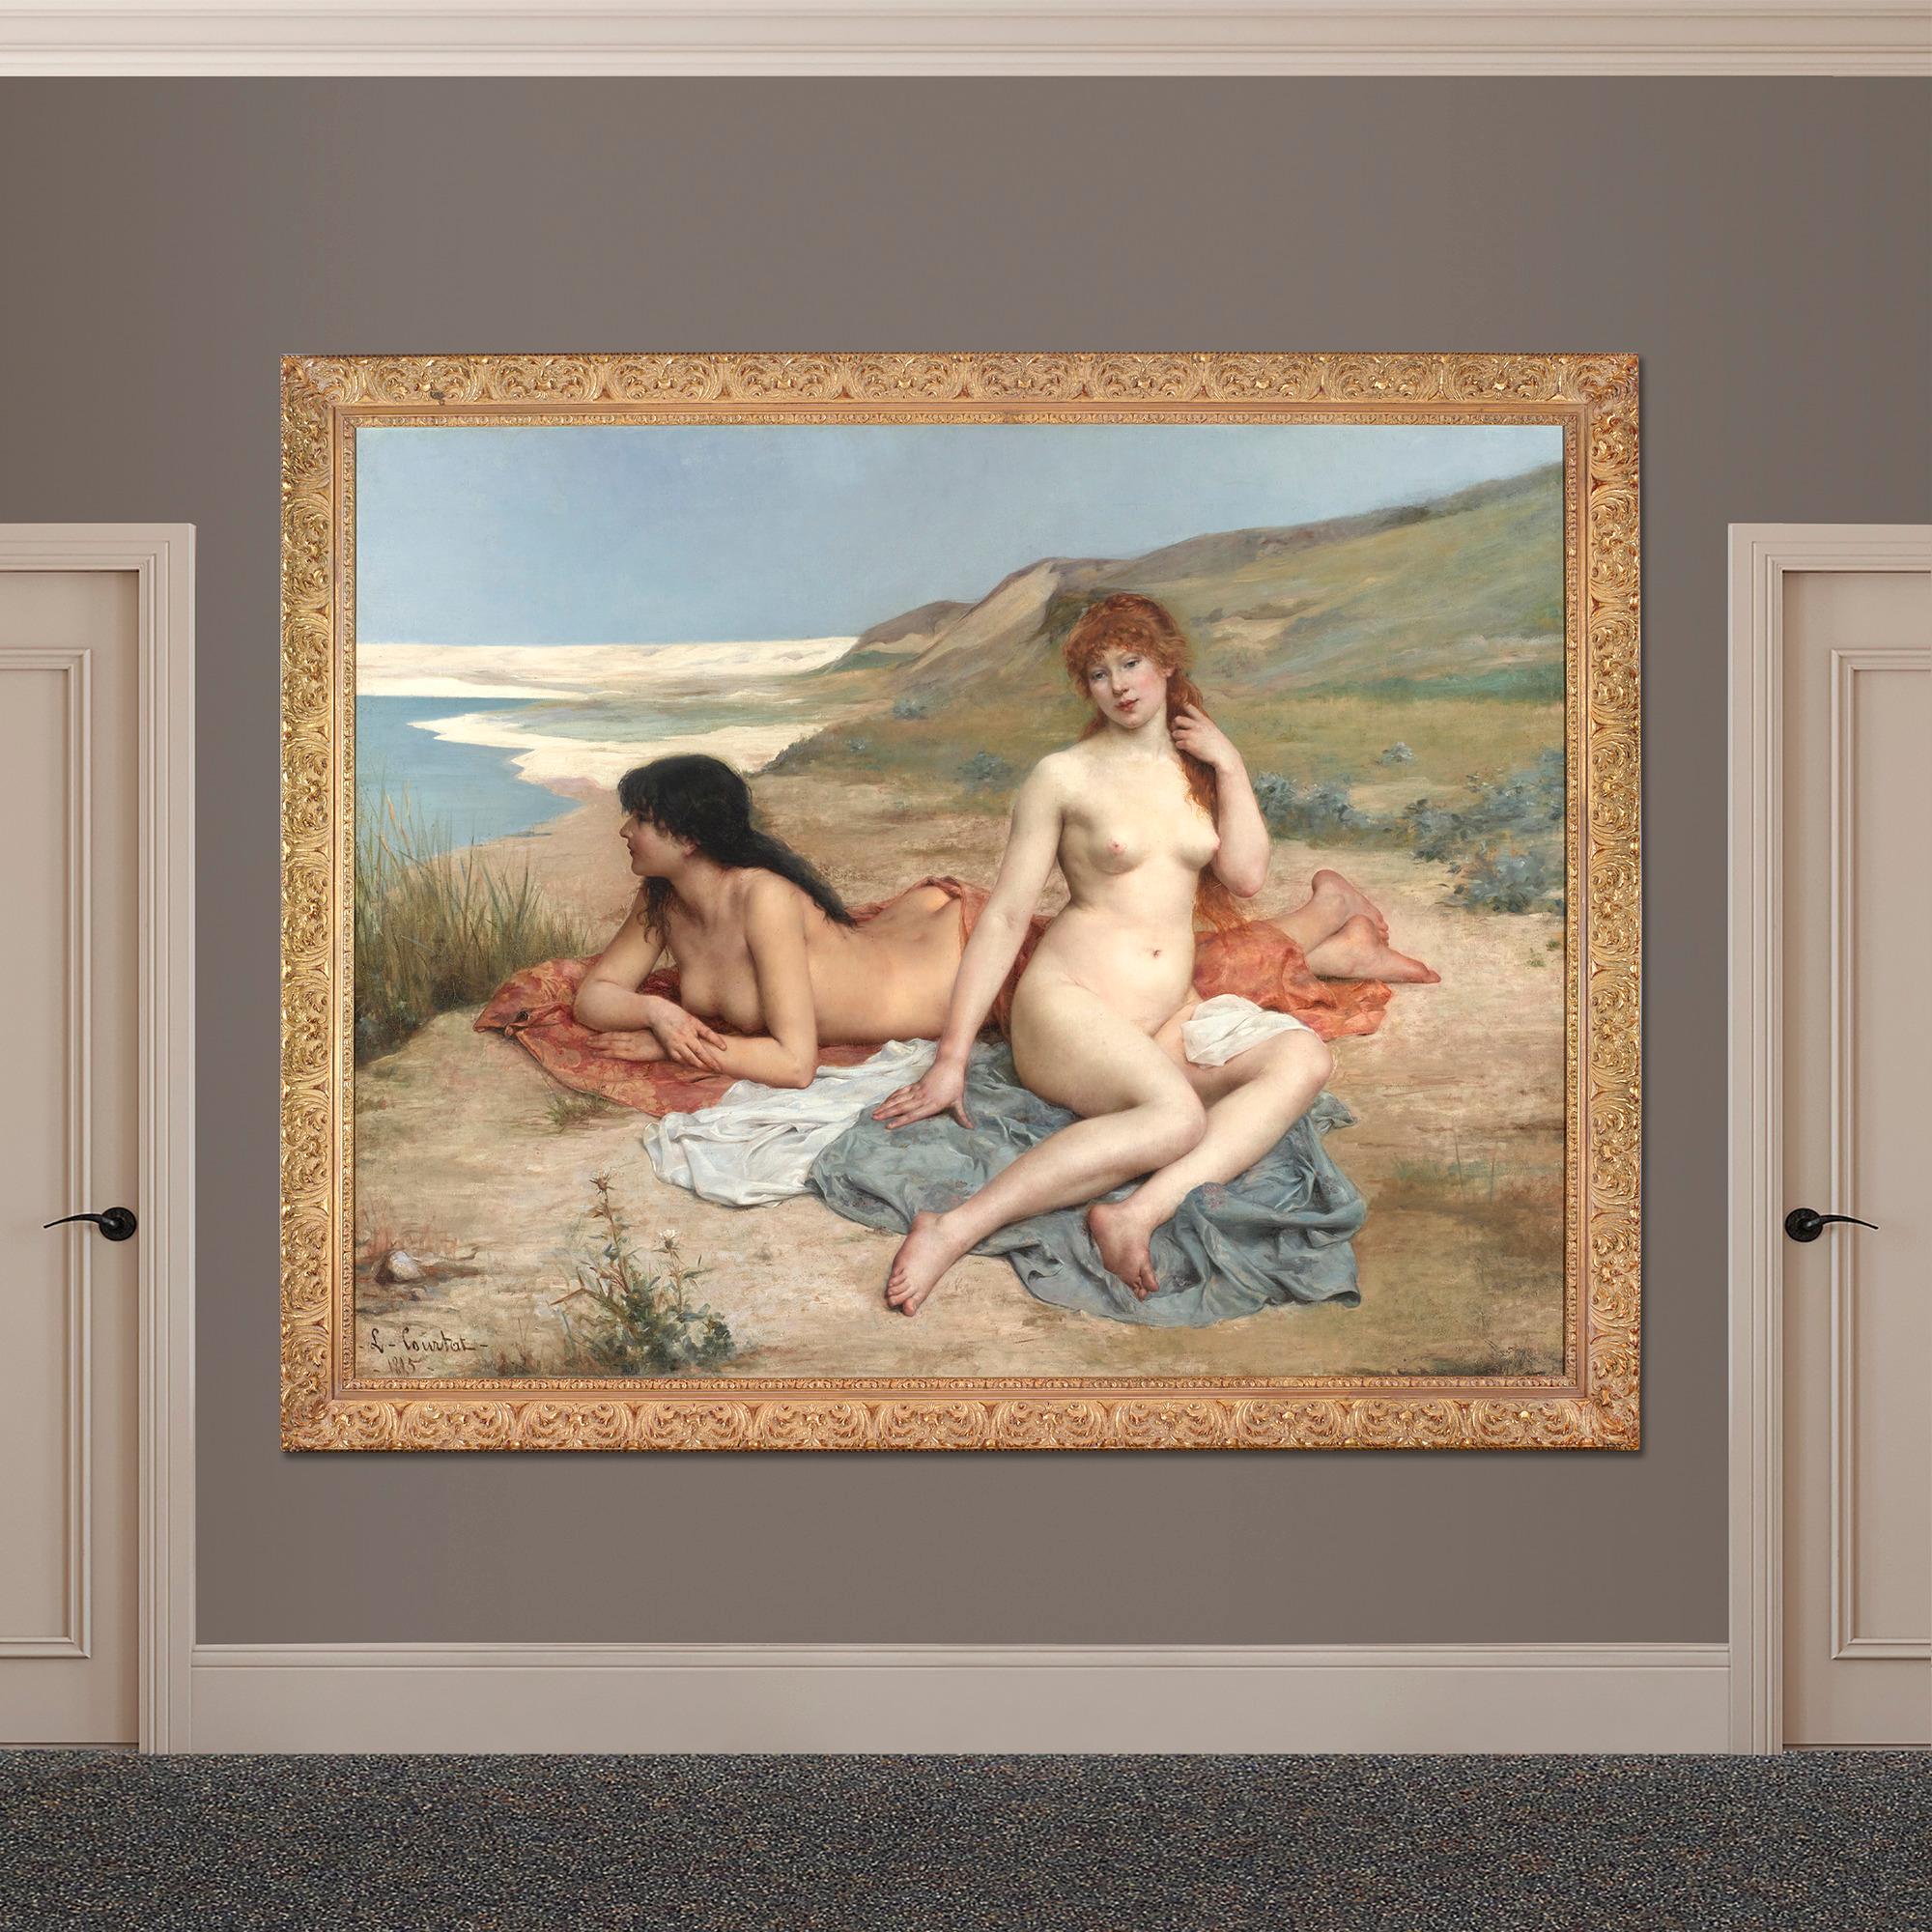 French Academic painter Louis-Joseph Courtat displays his mastery of composition and the female form in this entrancing oil on canvas. Entitled Baigneuses, the work was painted for and exhibited at the 1885 Paris Salon, the foremost exhibition of